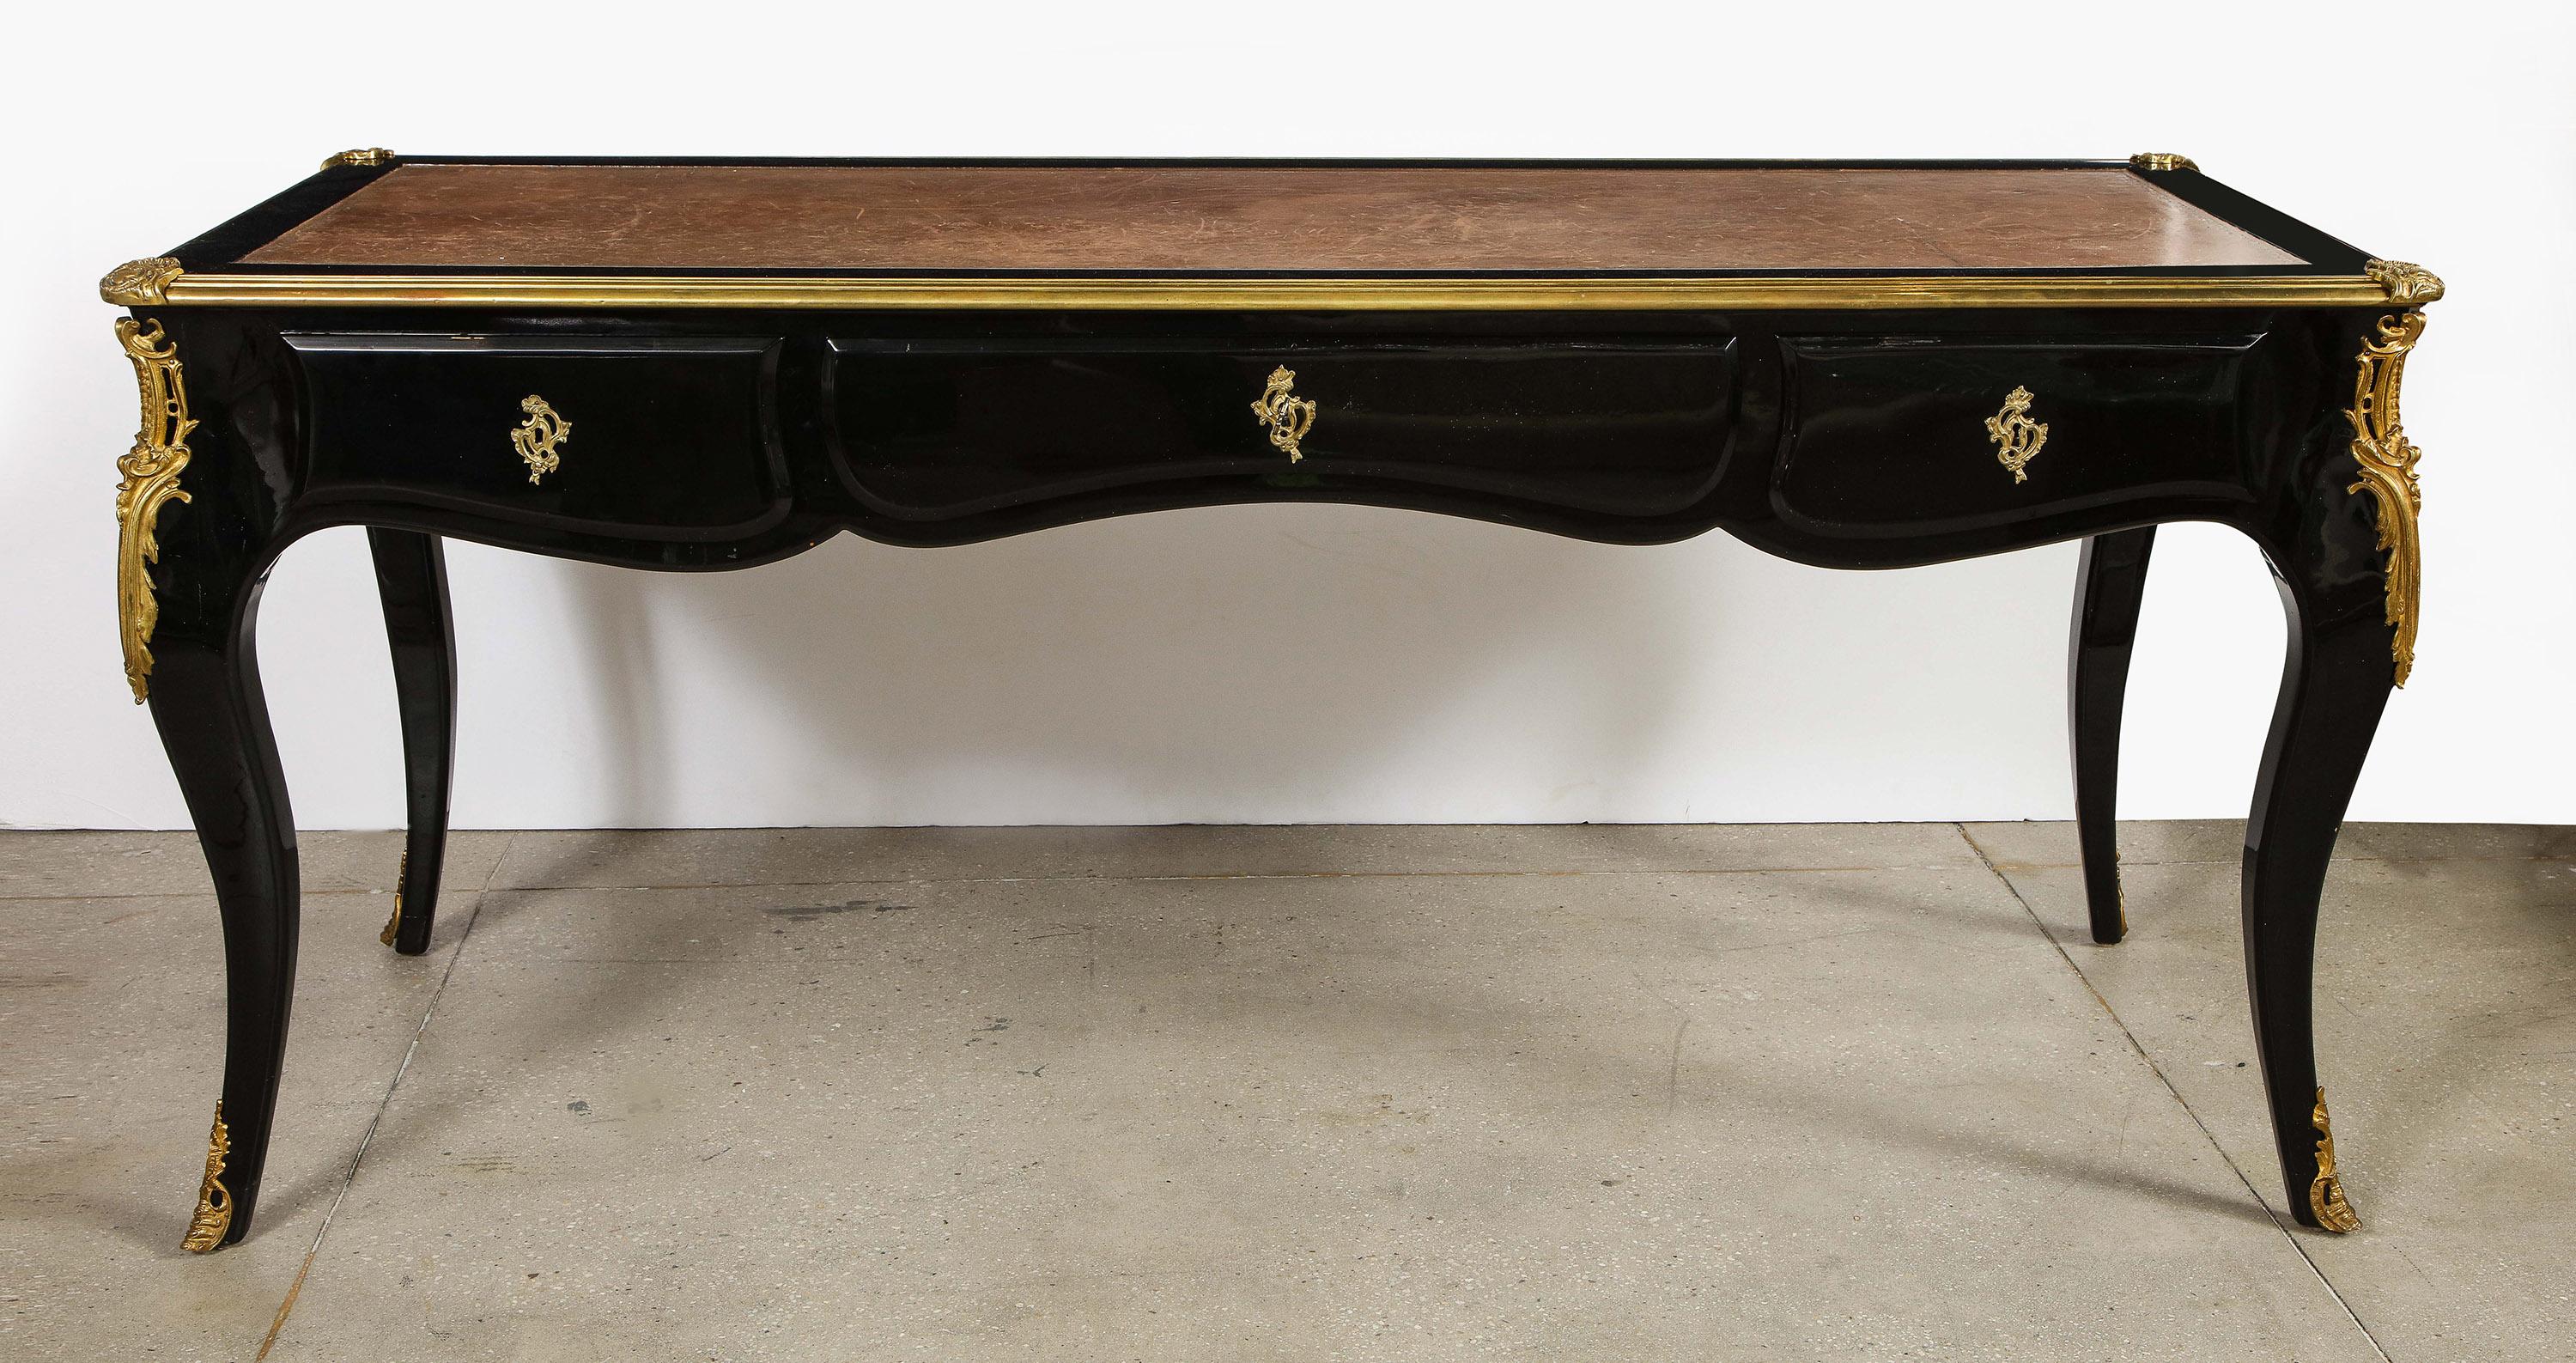 Louis XV style black lacquer Bureau plat

French 19th century Louis XV style black lacquer Bureau plat, raised on bronze mounted cabriole legs, the scalloped shaped frieze with three drawers each with an ormolu escutcheon, the rear and sides